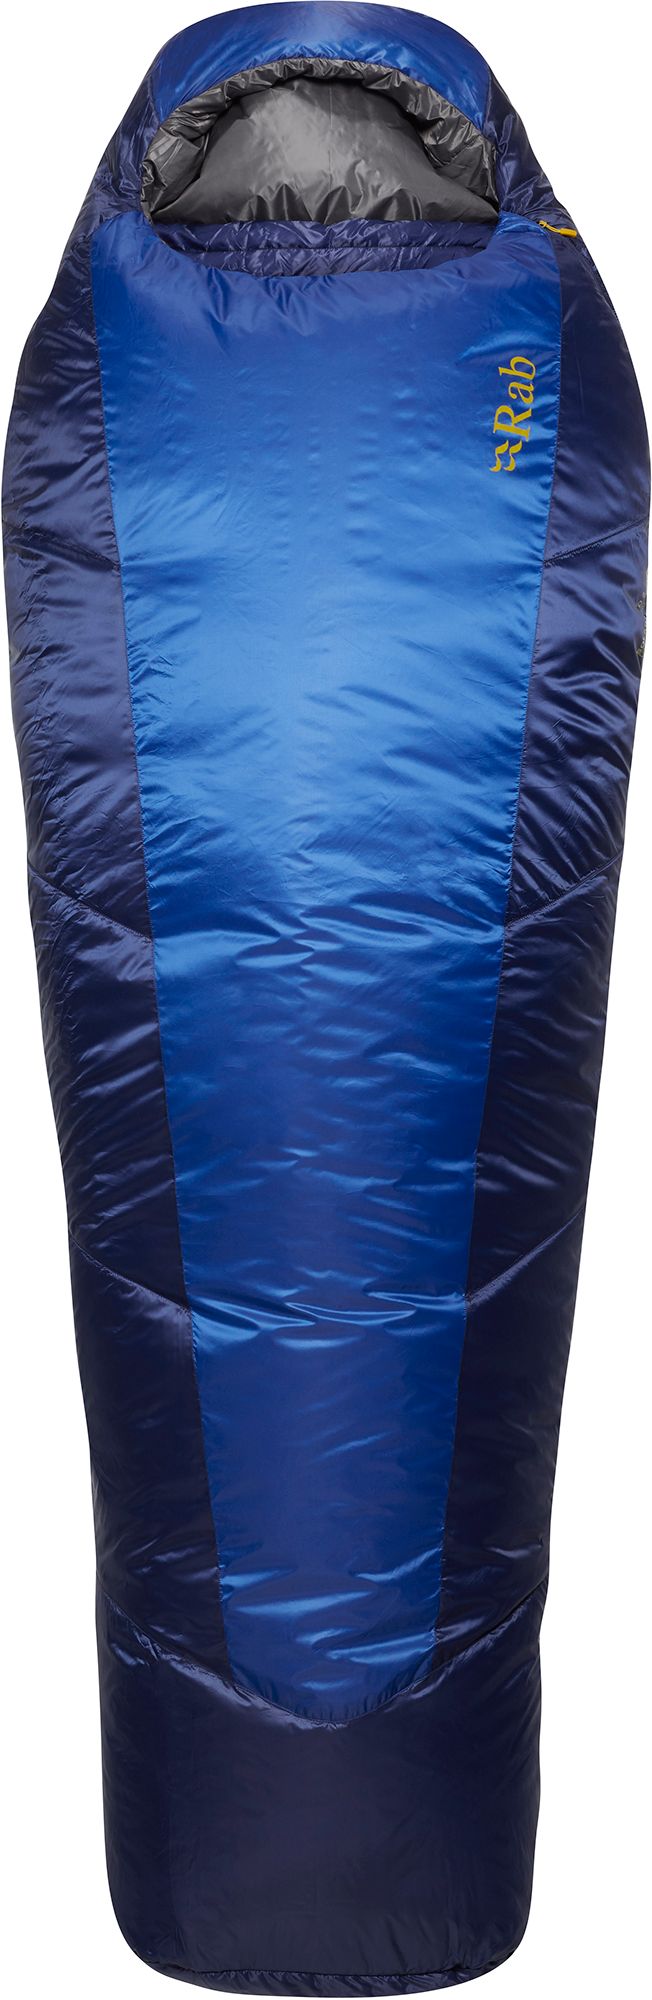 Photos - Suitcase / Backpack Cover Rab Solar Eco 4 Sleeping Bag 10, Left Hand, Men's, Long, Ascent Blue 22XFW 